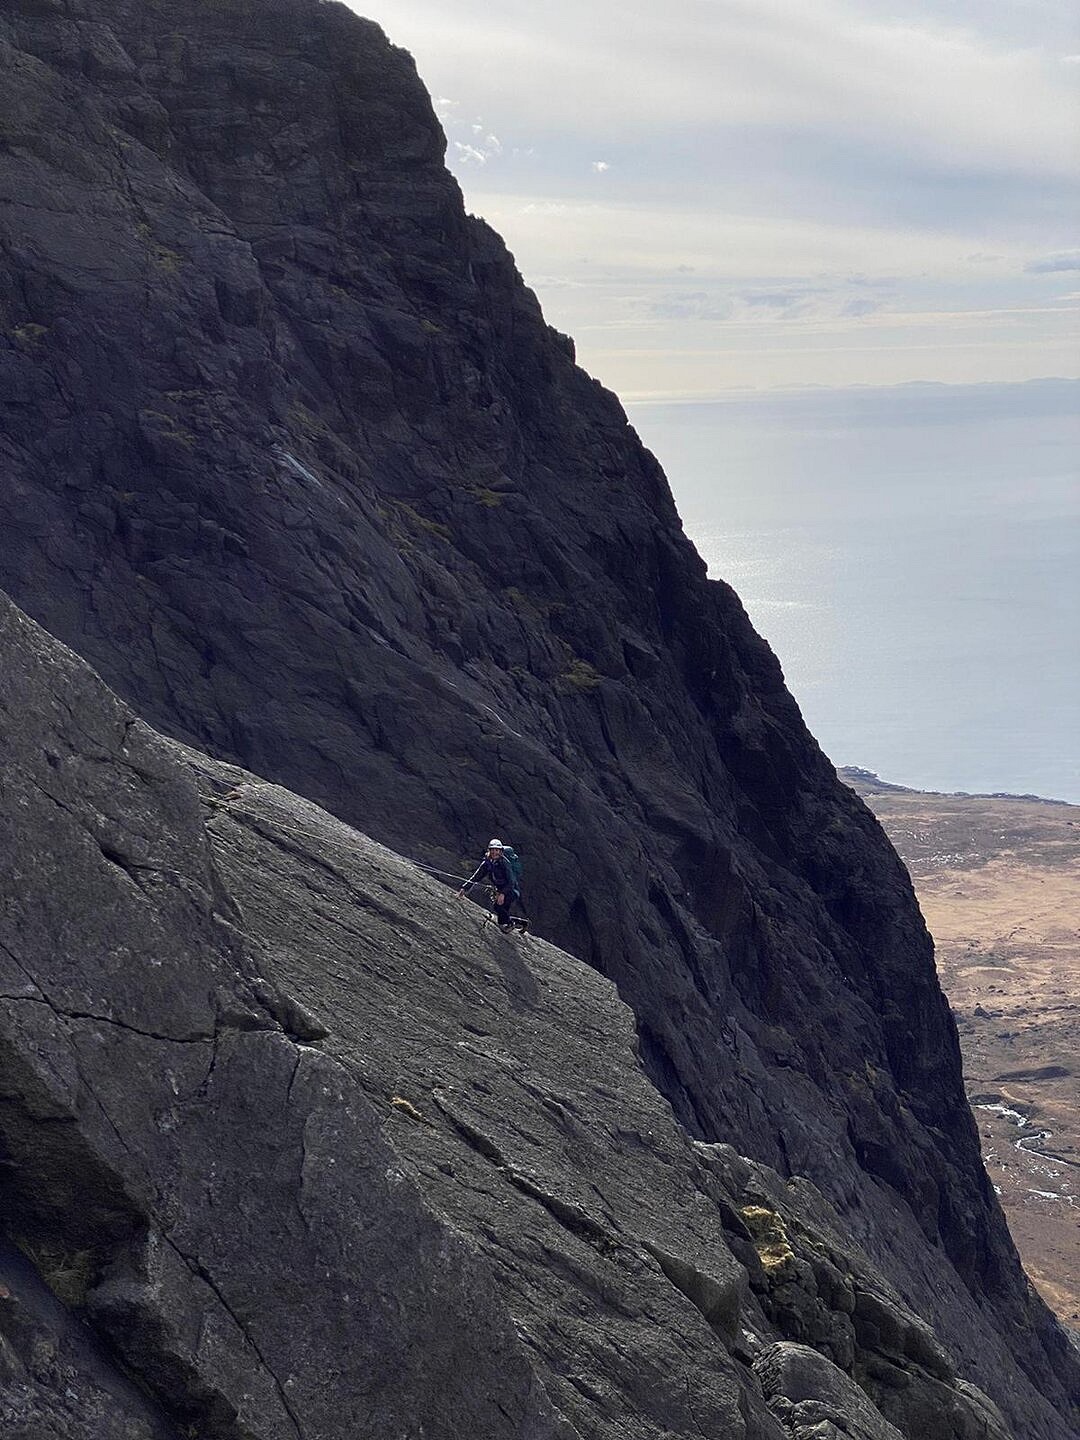 Another party took this photo of me topping out of Cioch West on Skye.   © Jennaf89